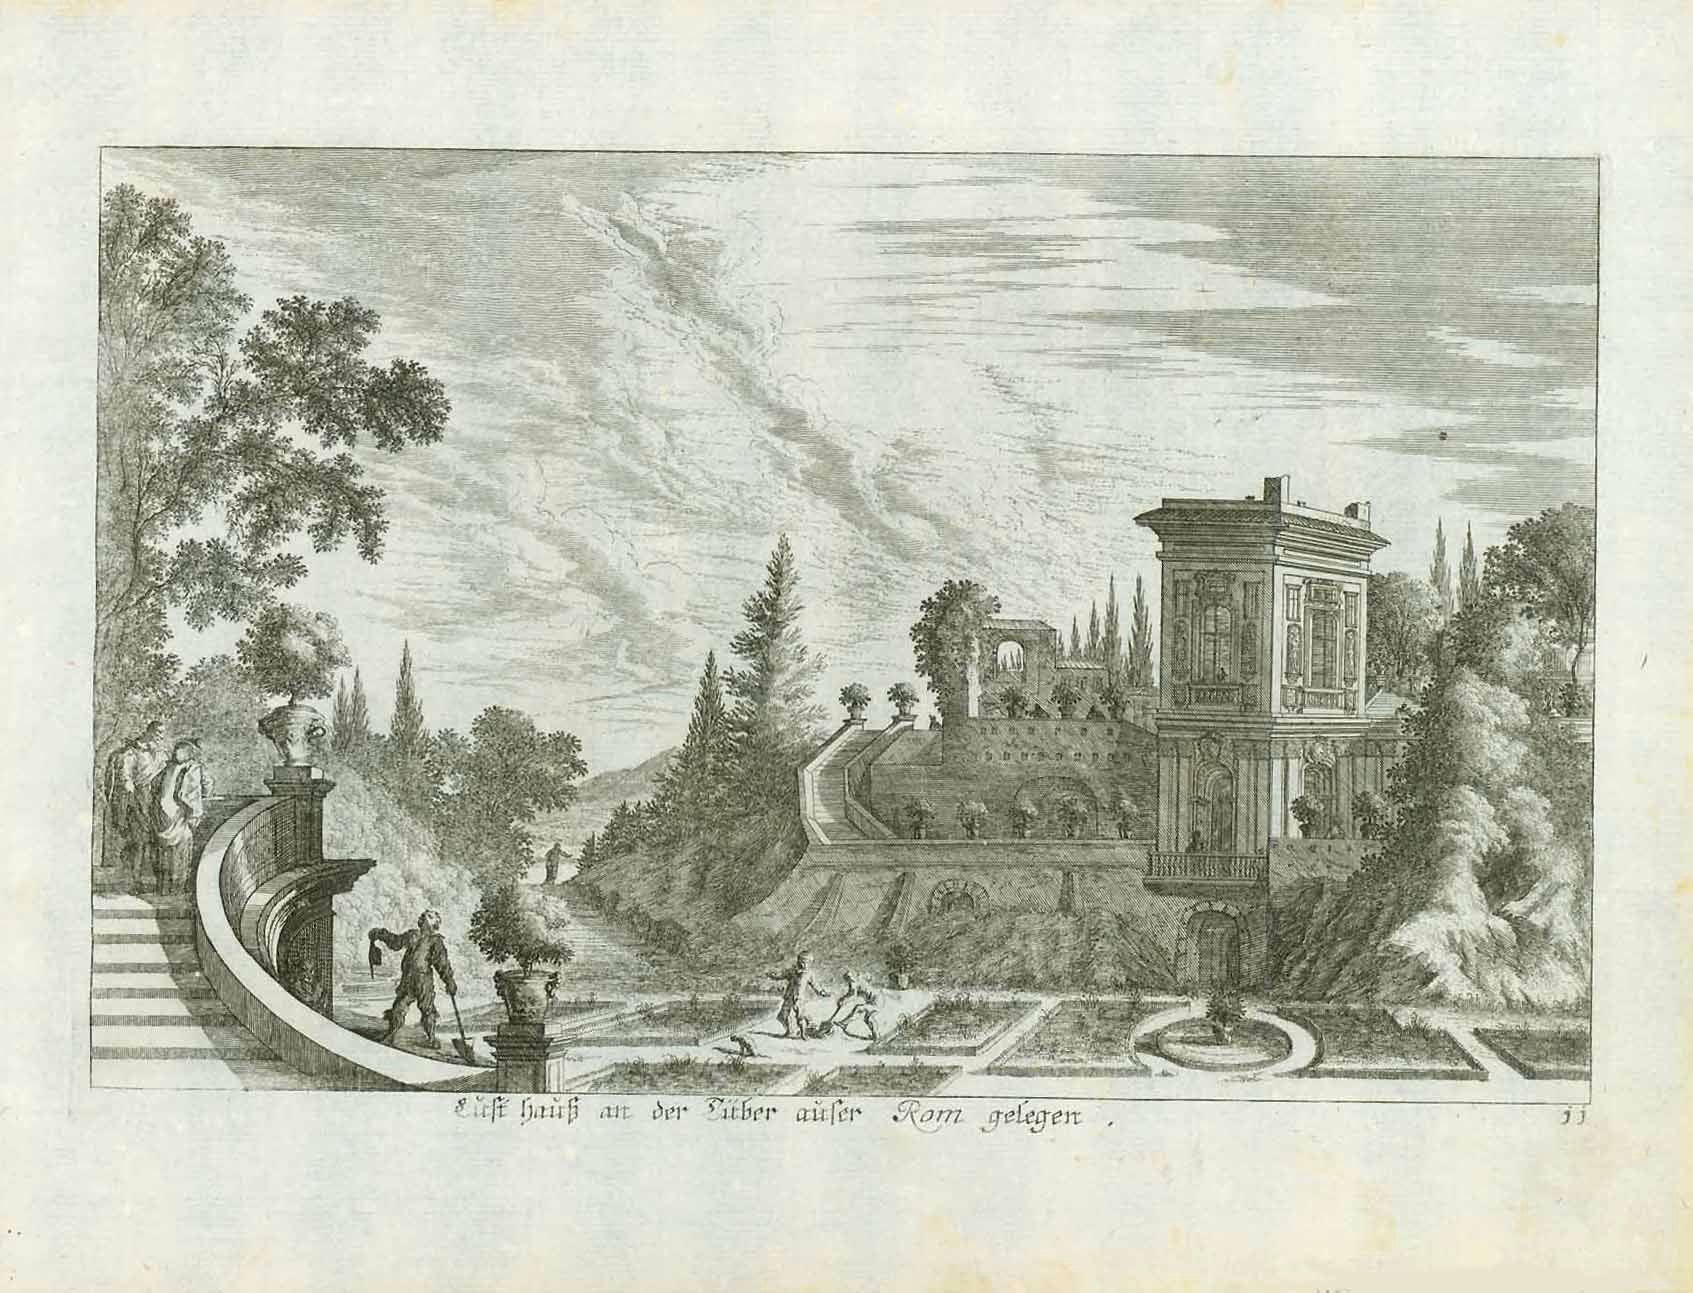 "Lusthaus n der Tiber ausser Rom gelegen" (House of pleasure on the Tiber outside of Rome)  Copper engraving by Melchior Kuesell (1626.1683) after Johann Wilhelm Baur(1607-1640). Published in Augsburg 1703 by Johann Ulrich Krauss. From "Iconographia"., interior design, wall decoration, ideas, idea, gift ideas, present, vintage, charming, special, decoration, home interior, living room design